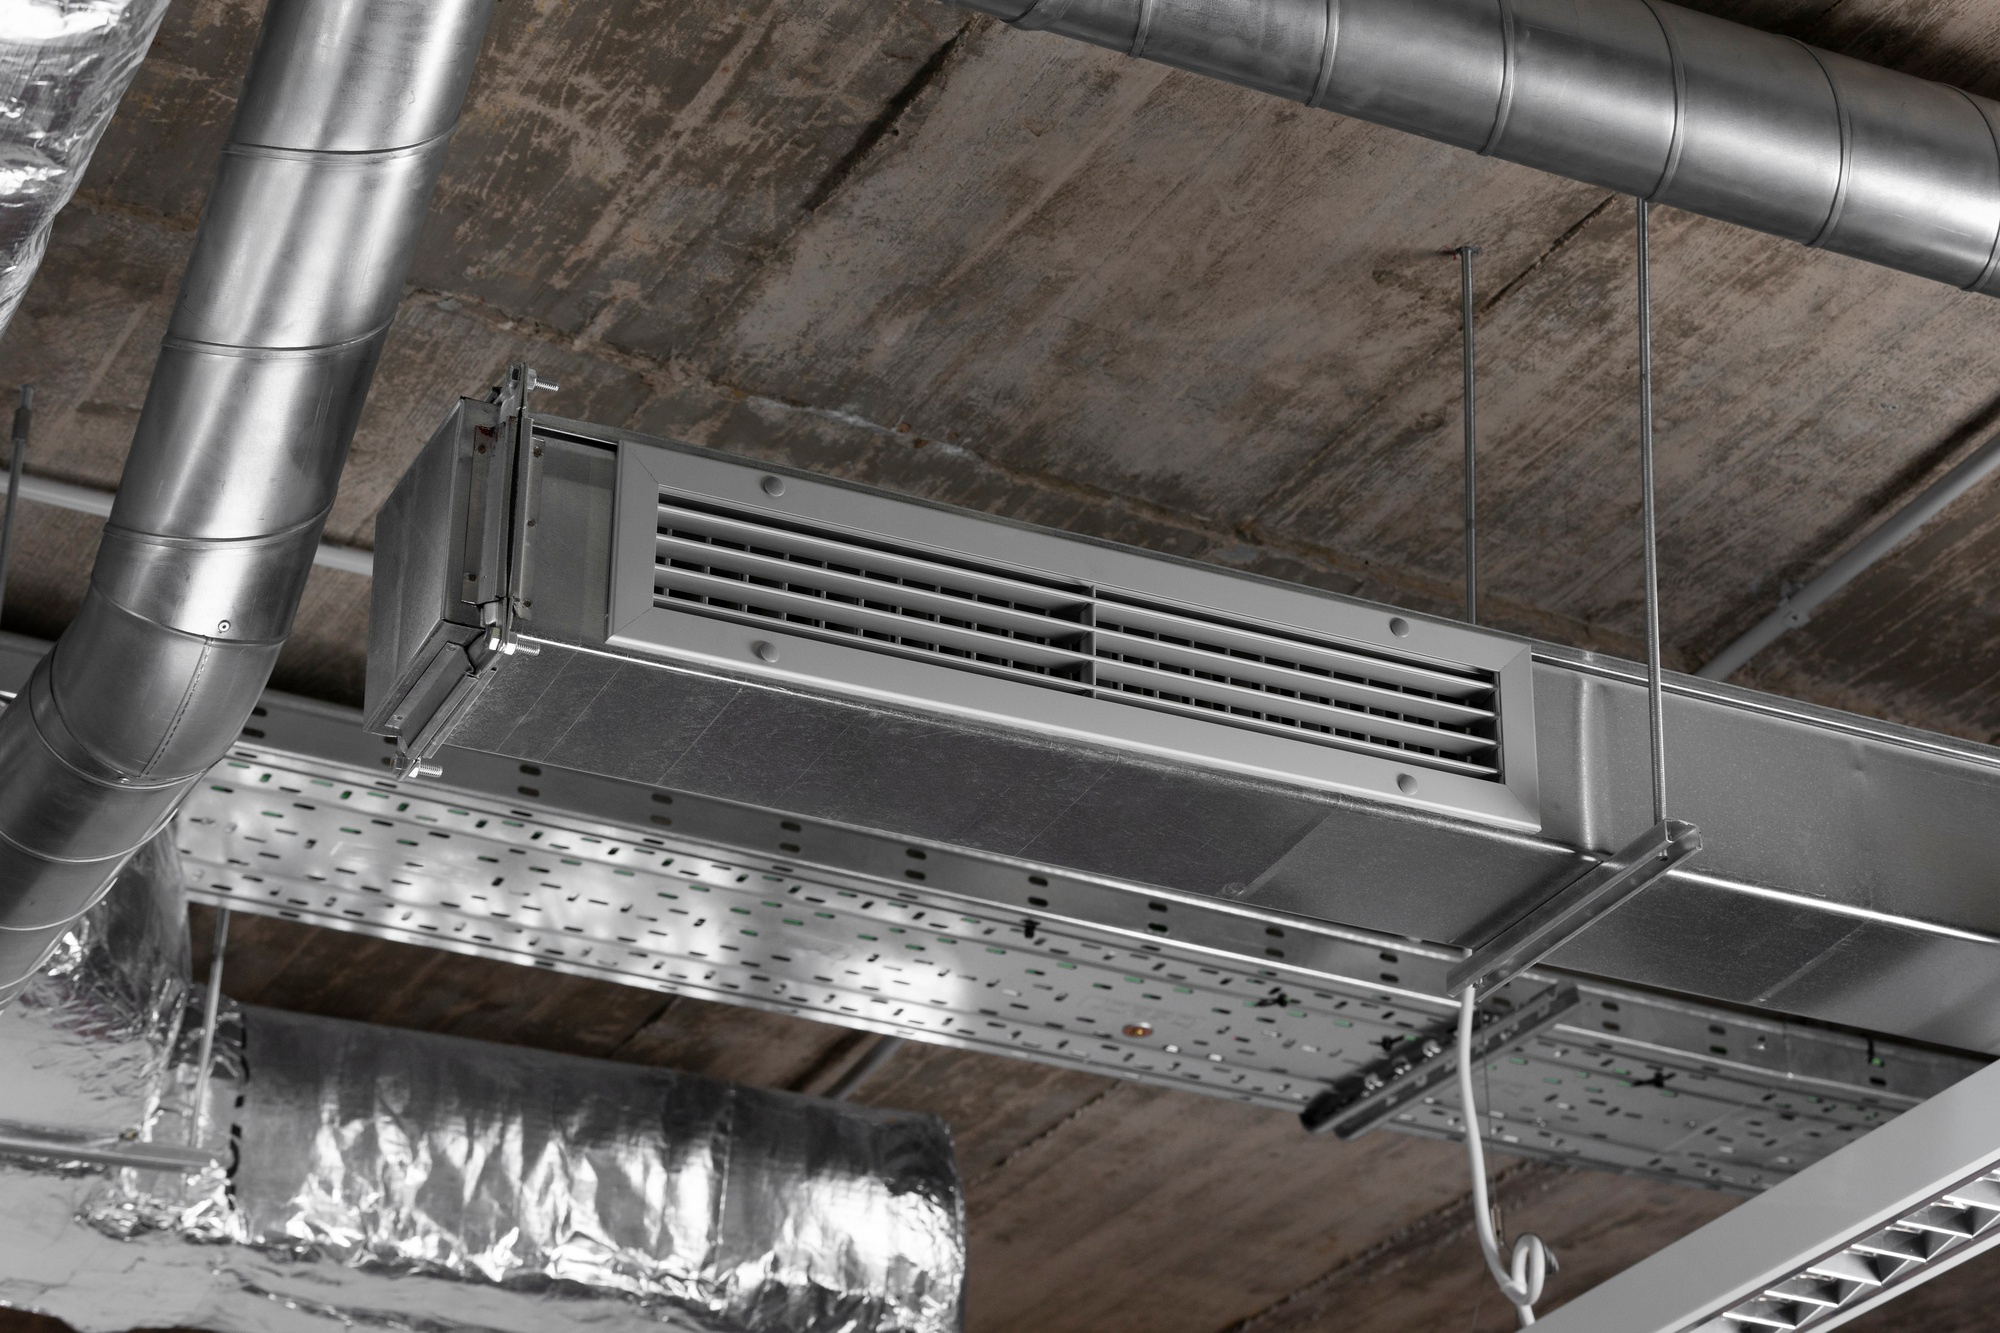 Commercial dryer vent cleaning applications in Ottawa: